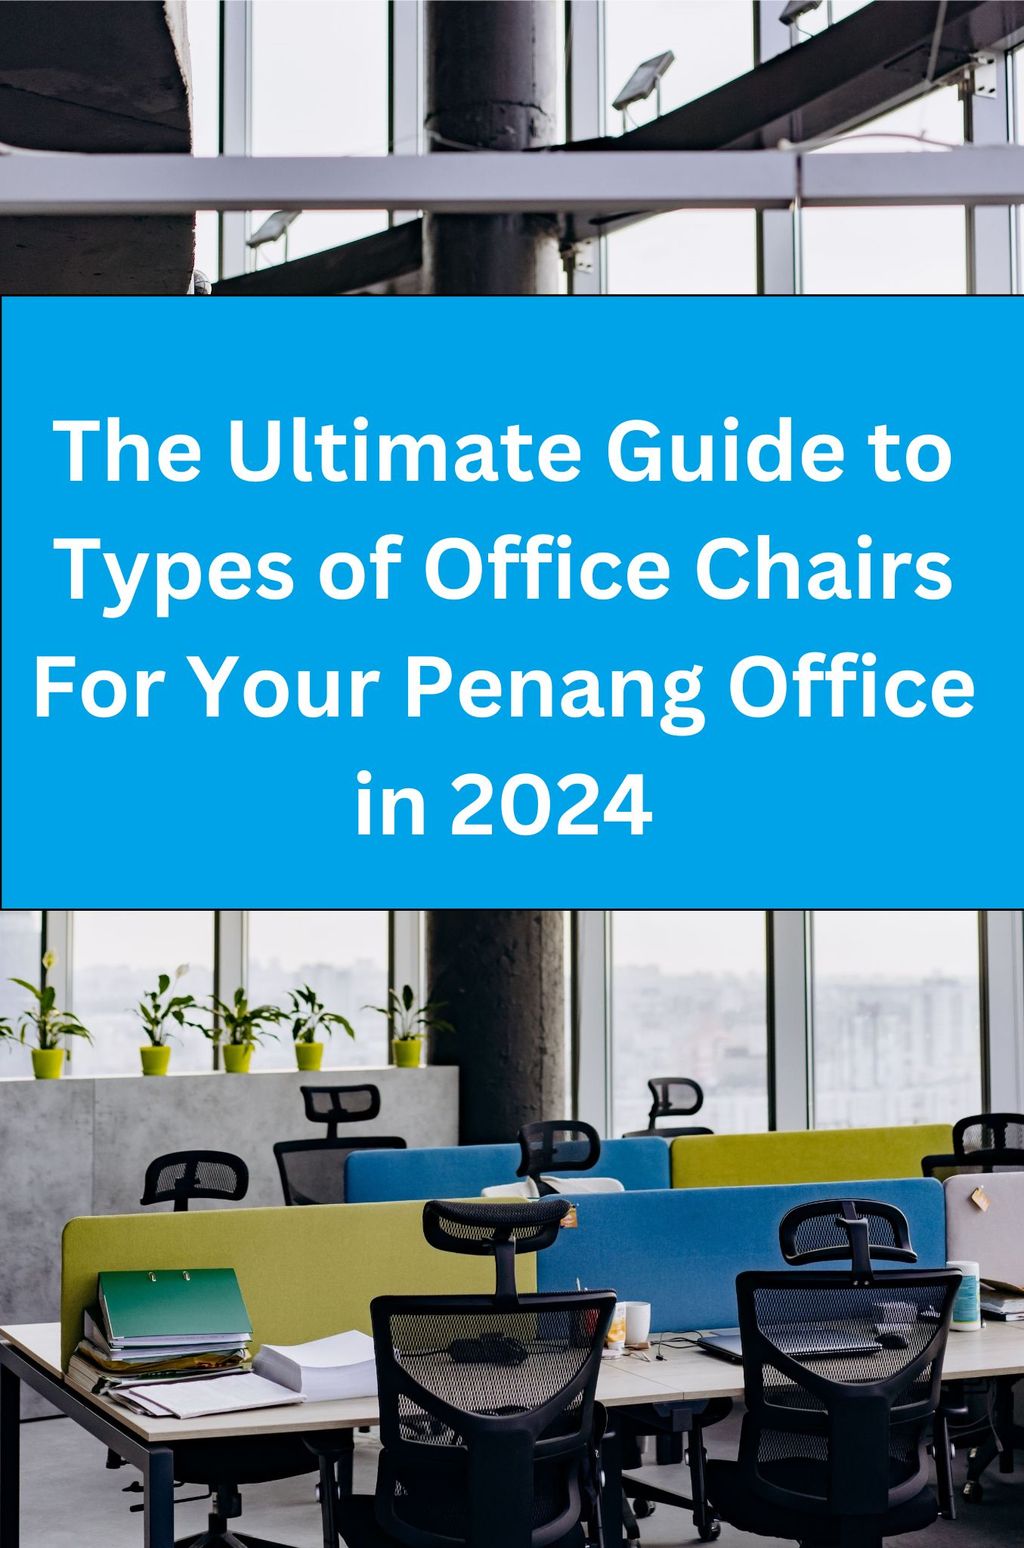 The Ultimate Guide to Types of Office Chairs For Your Penang Office in 2024